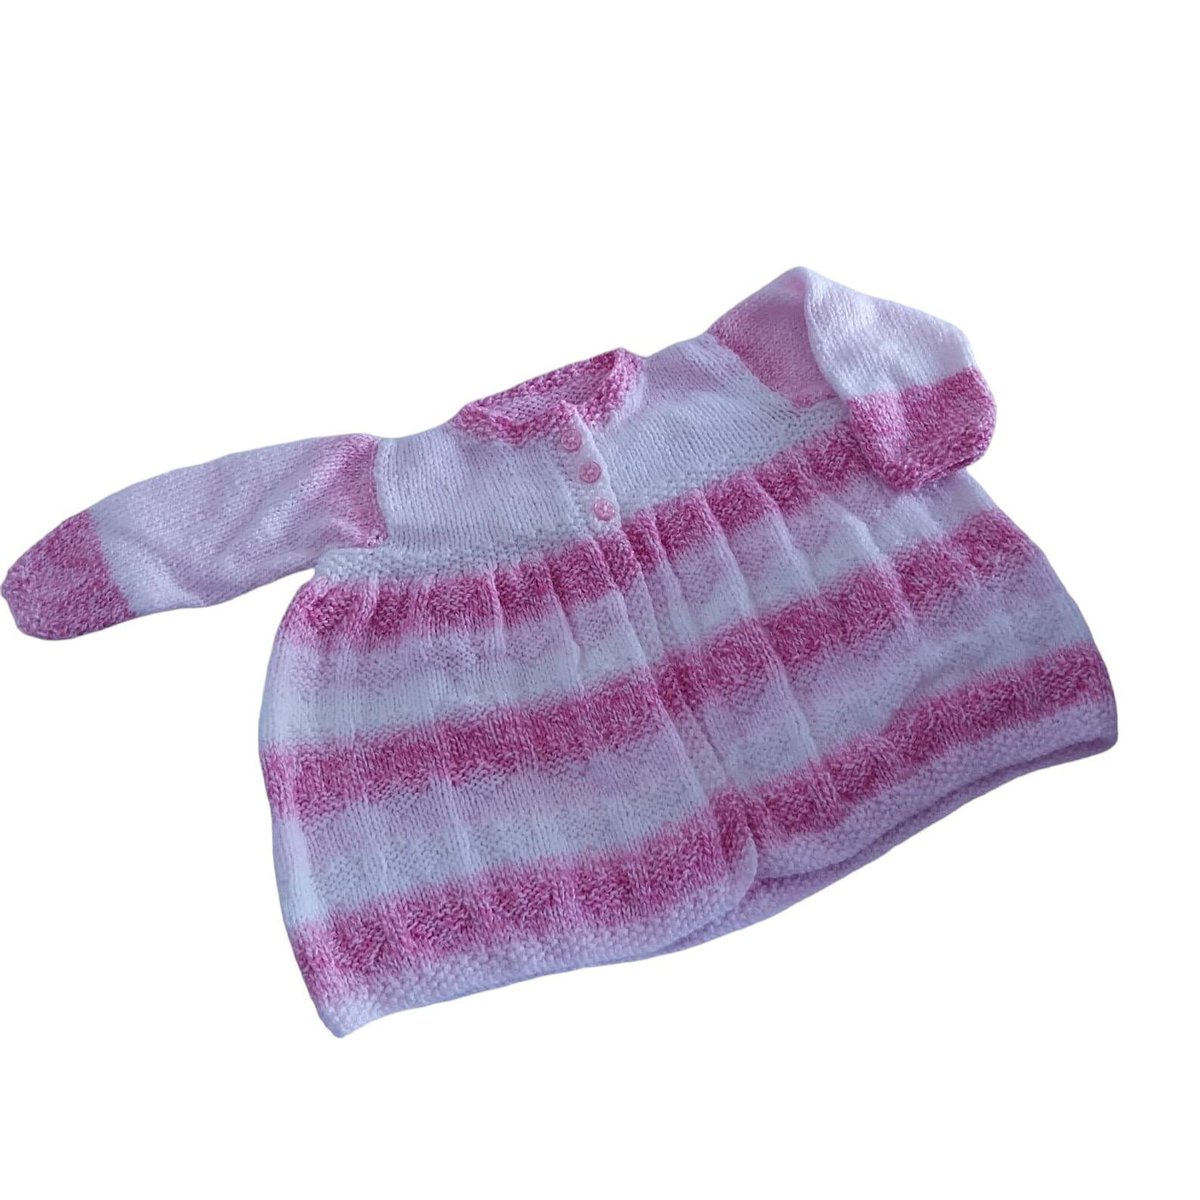 Dress your baby in this cozy hand knitted cardigan in pink and white. Perfect fit for little ones aged 3-6 months. Get it now on #Etsy! #knittingtopia #knittedbabyclothes knittingtopia.etsy.com/listing/174327… #MHHSBD #craftbizparty #babyessentials #shophandmade